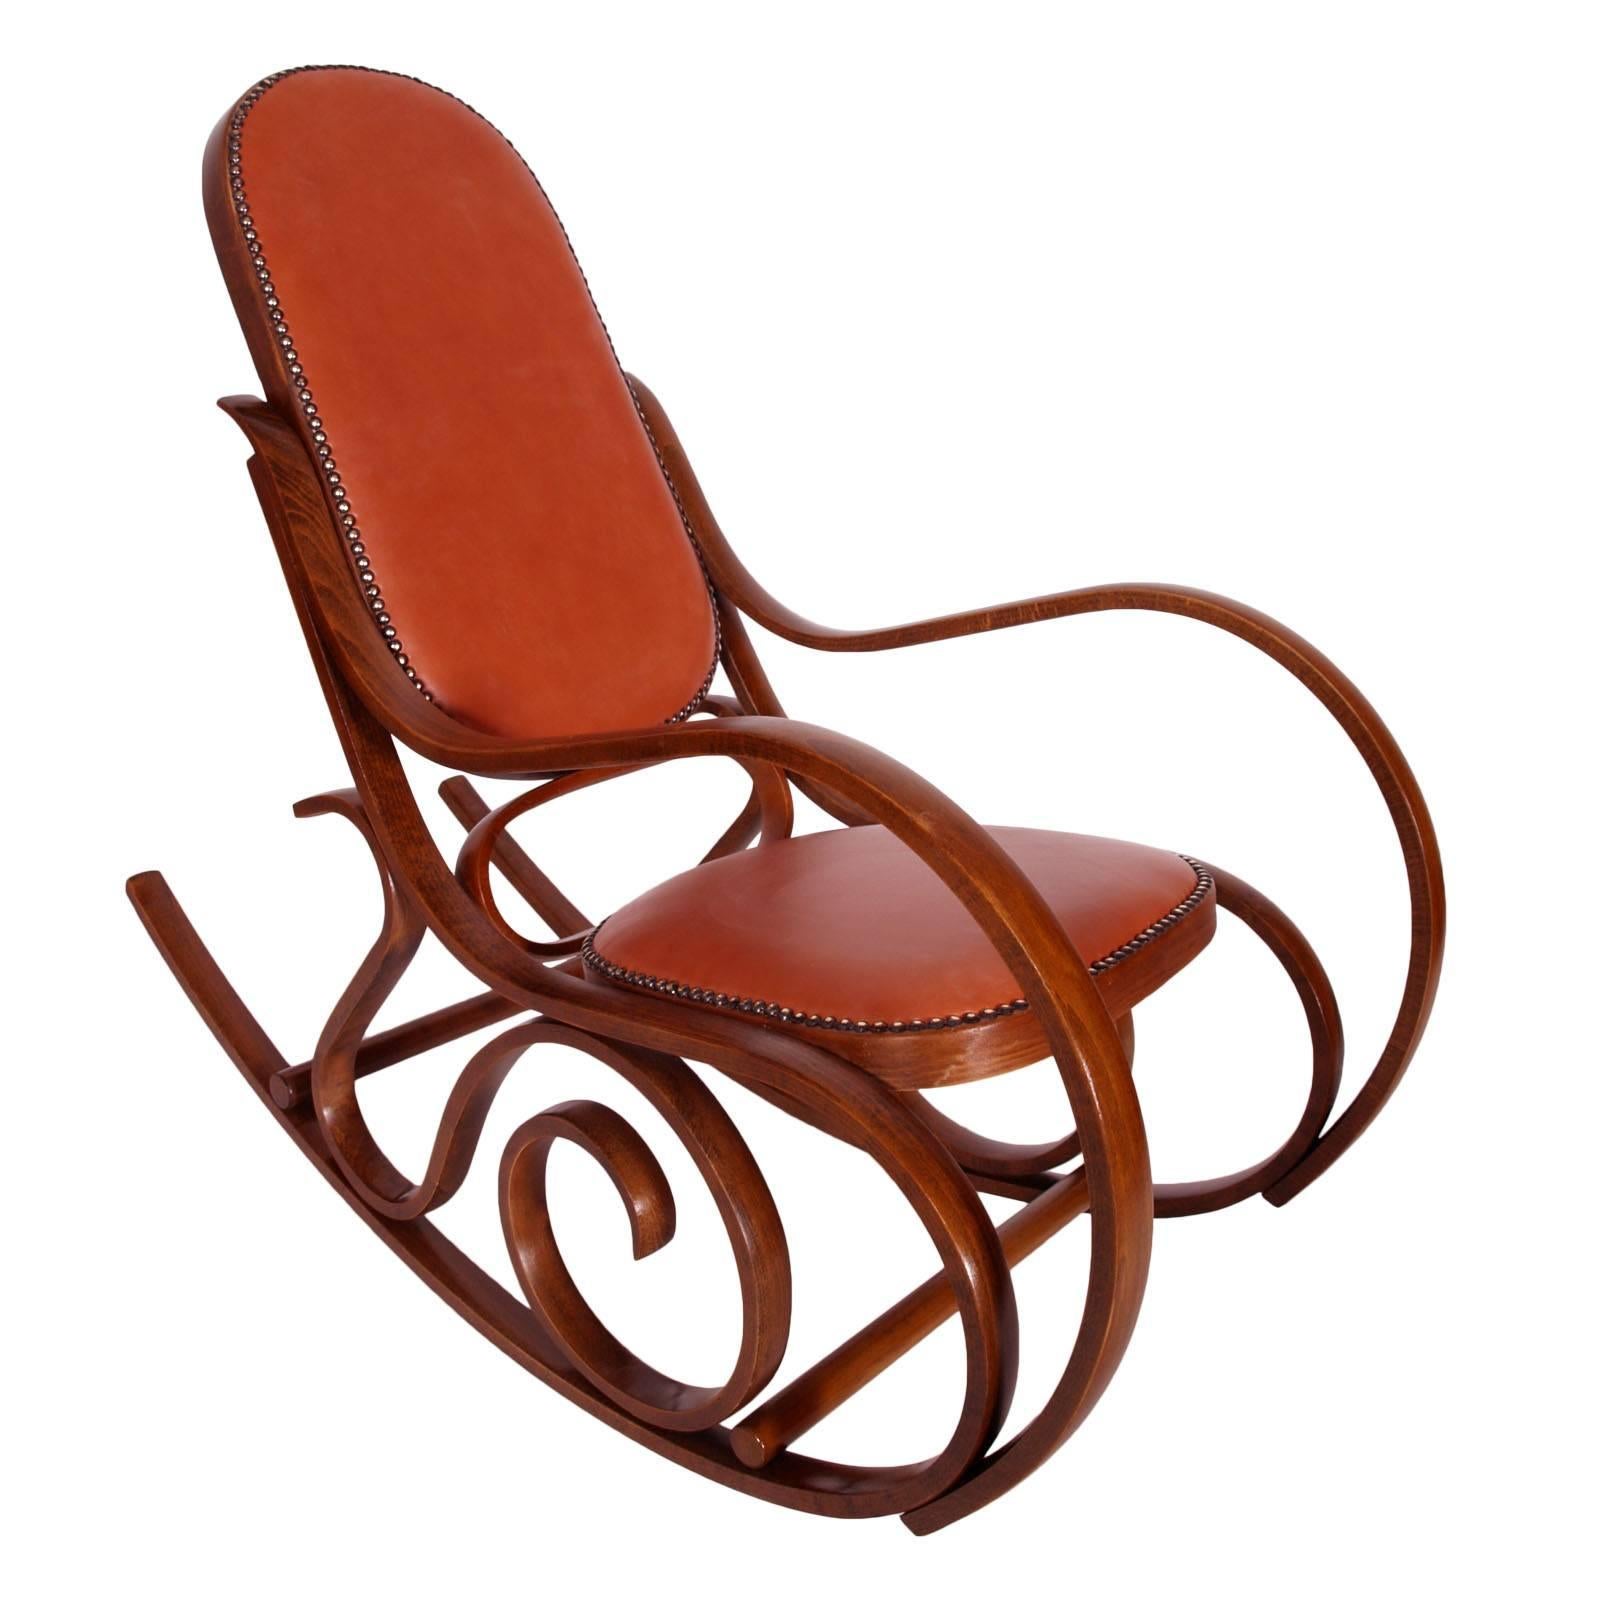 Early 20th Century Art Nouveau Thonet Rocking Chair in Steam Bent Beechwood